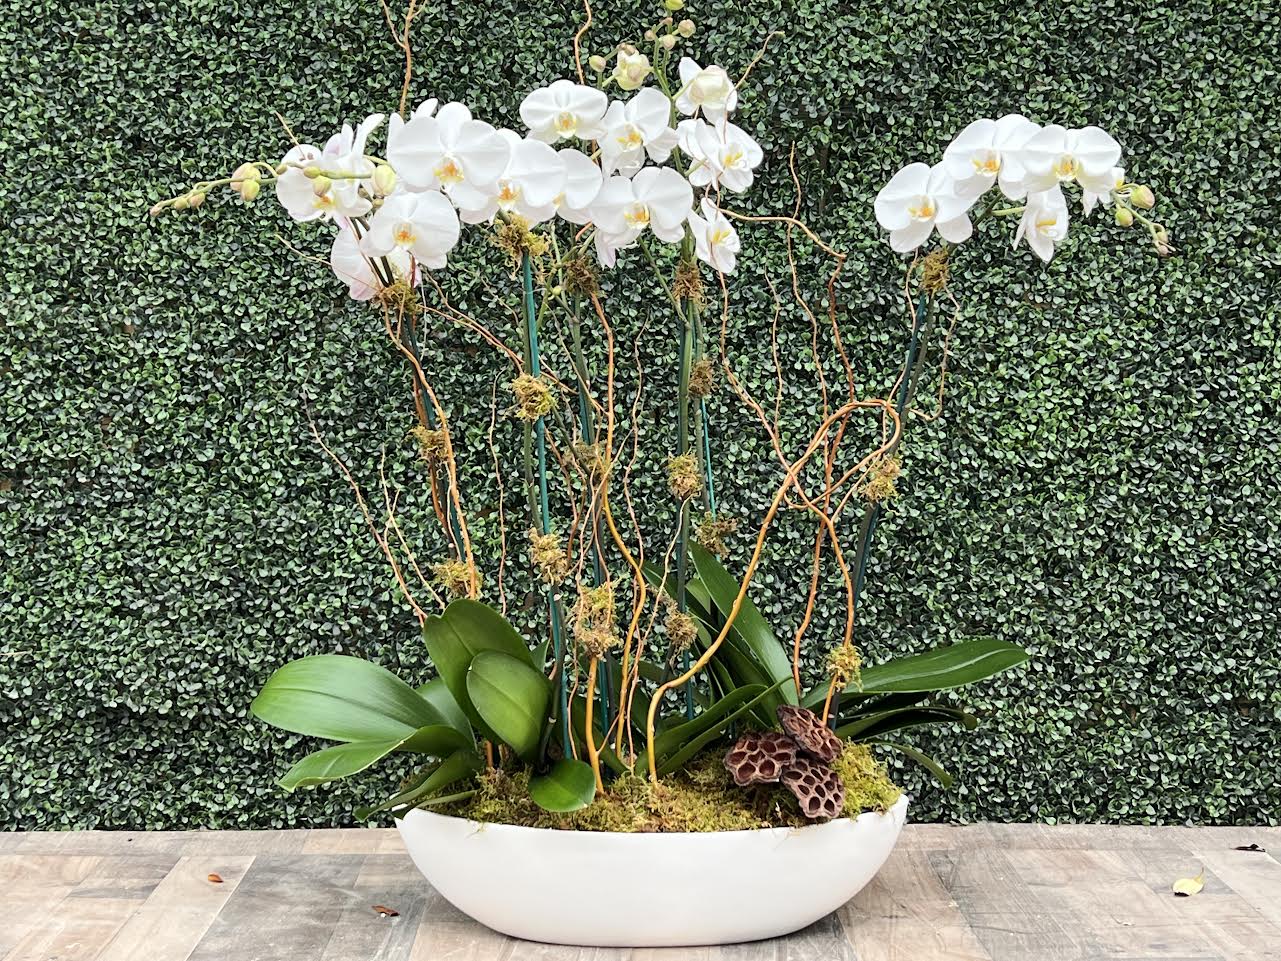 Orchids Galore  - White Orchids in an elegant white container!